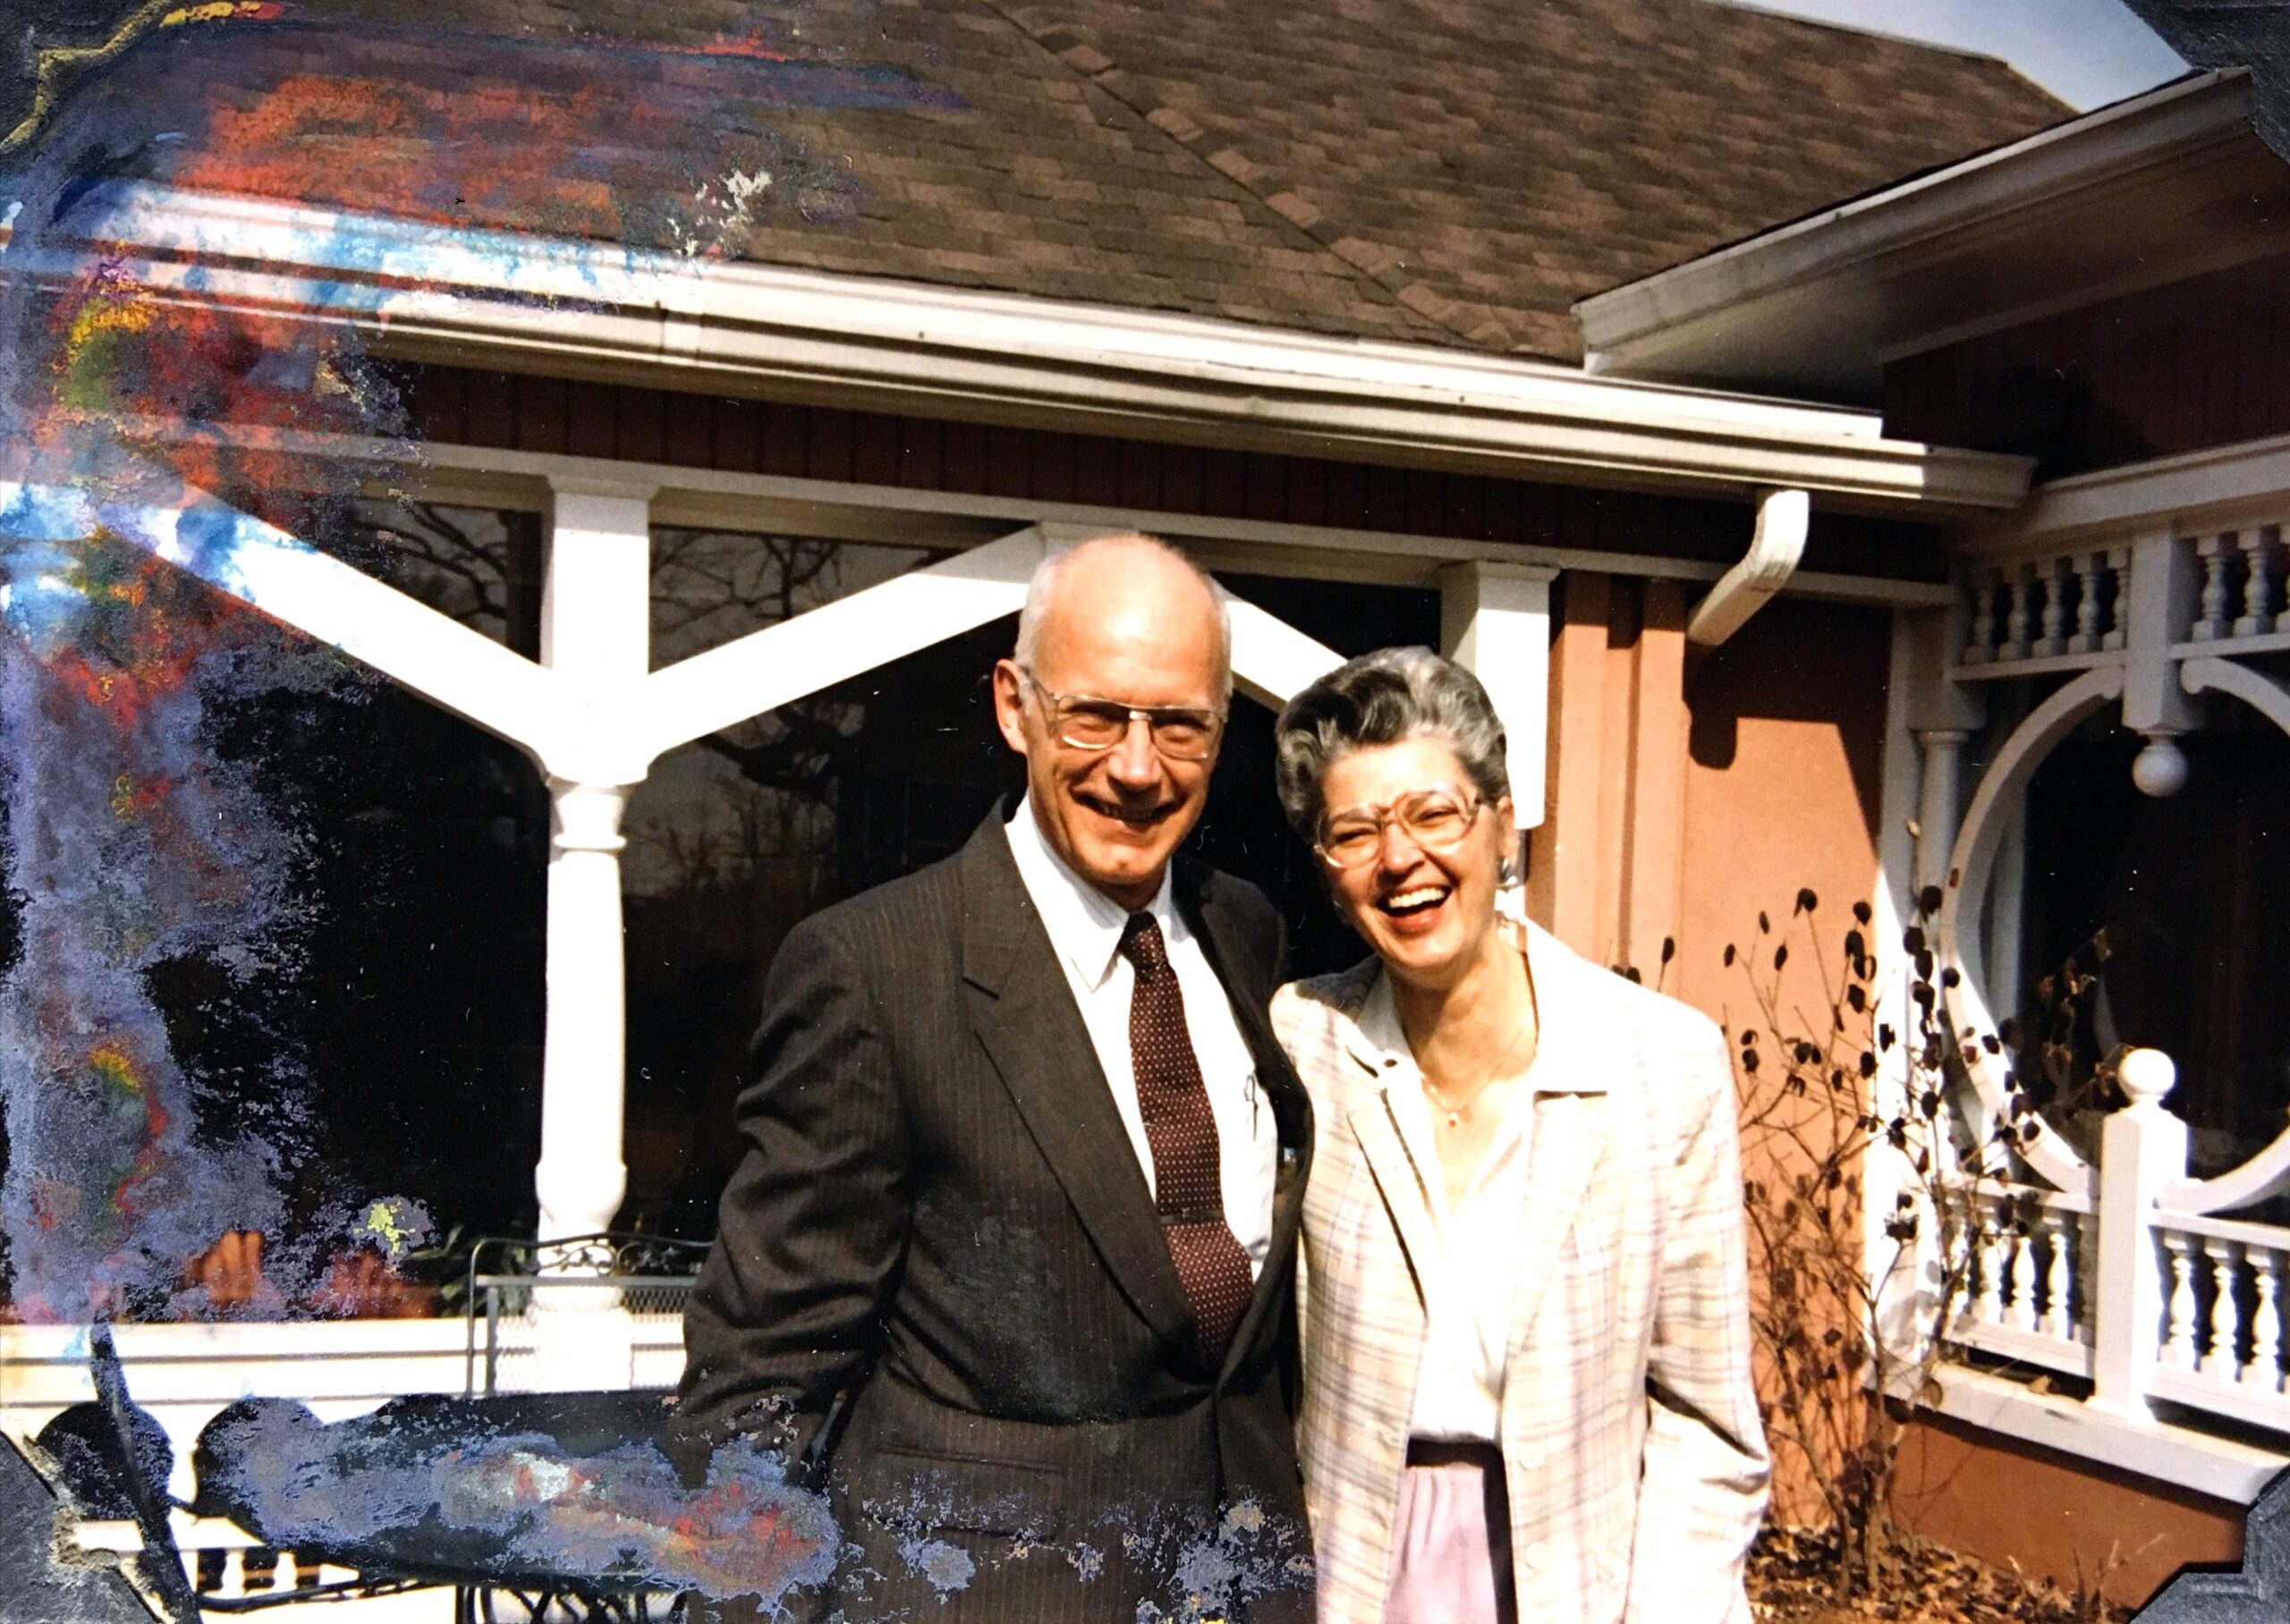 MBill and Catherine Byrd smiling in front of their home in the 1990s.